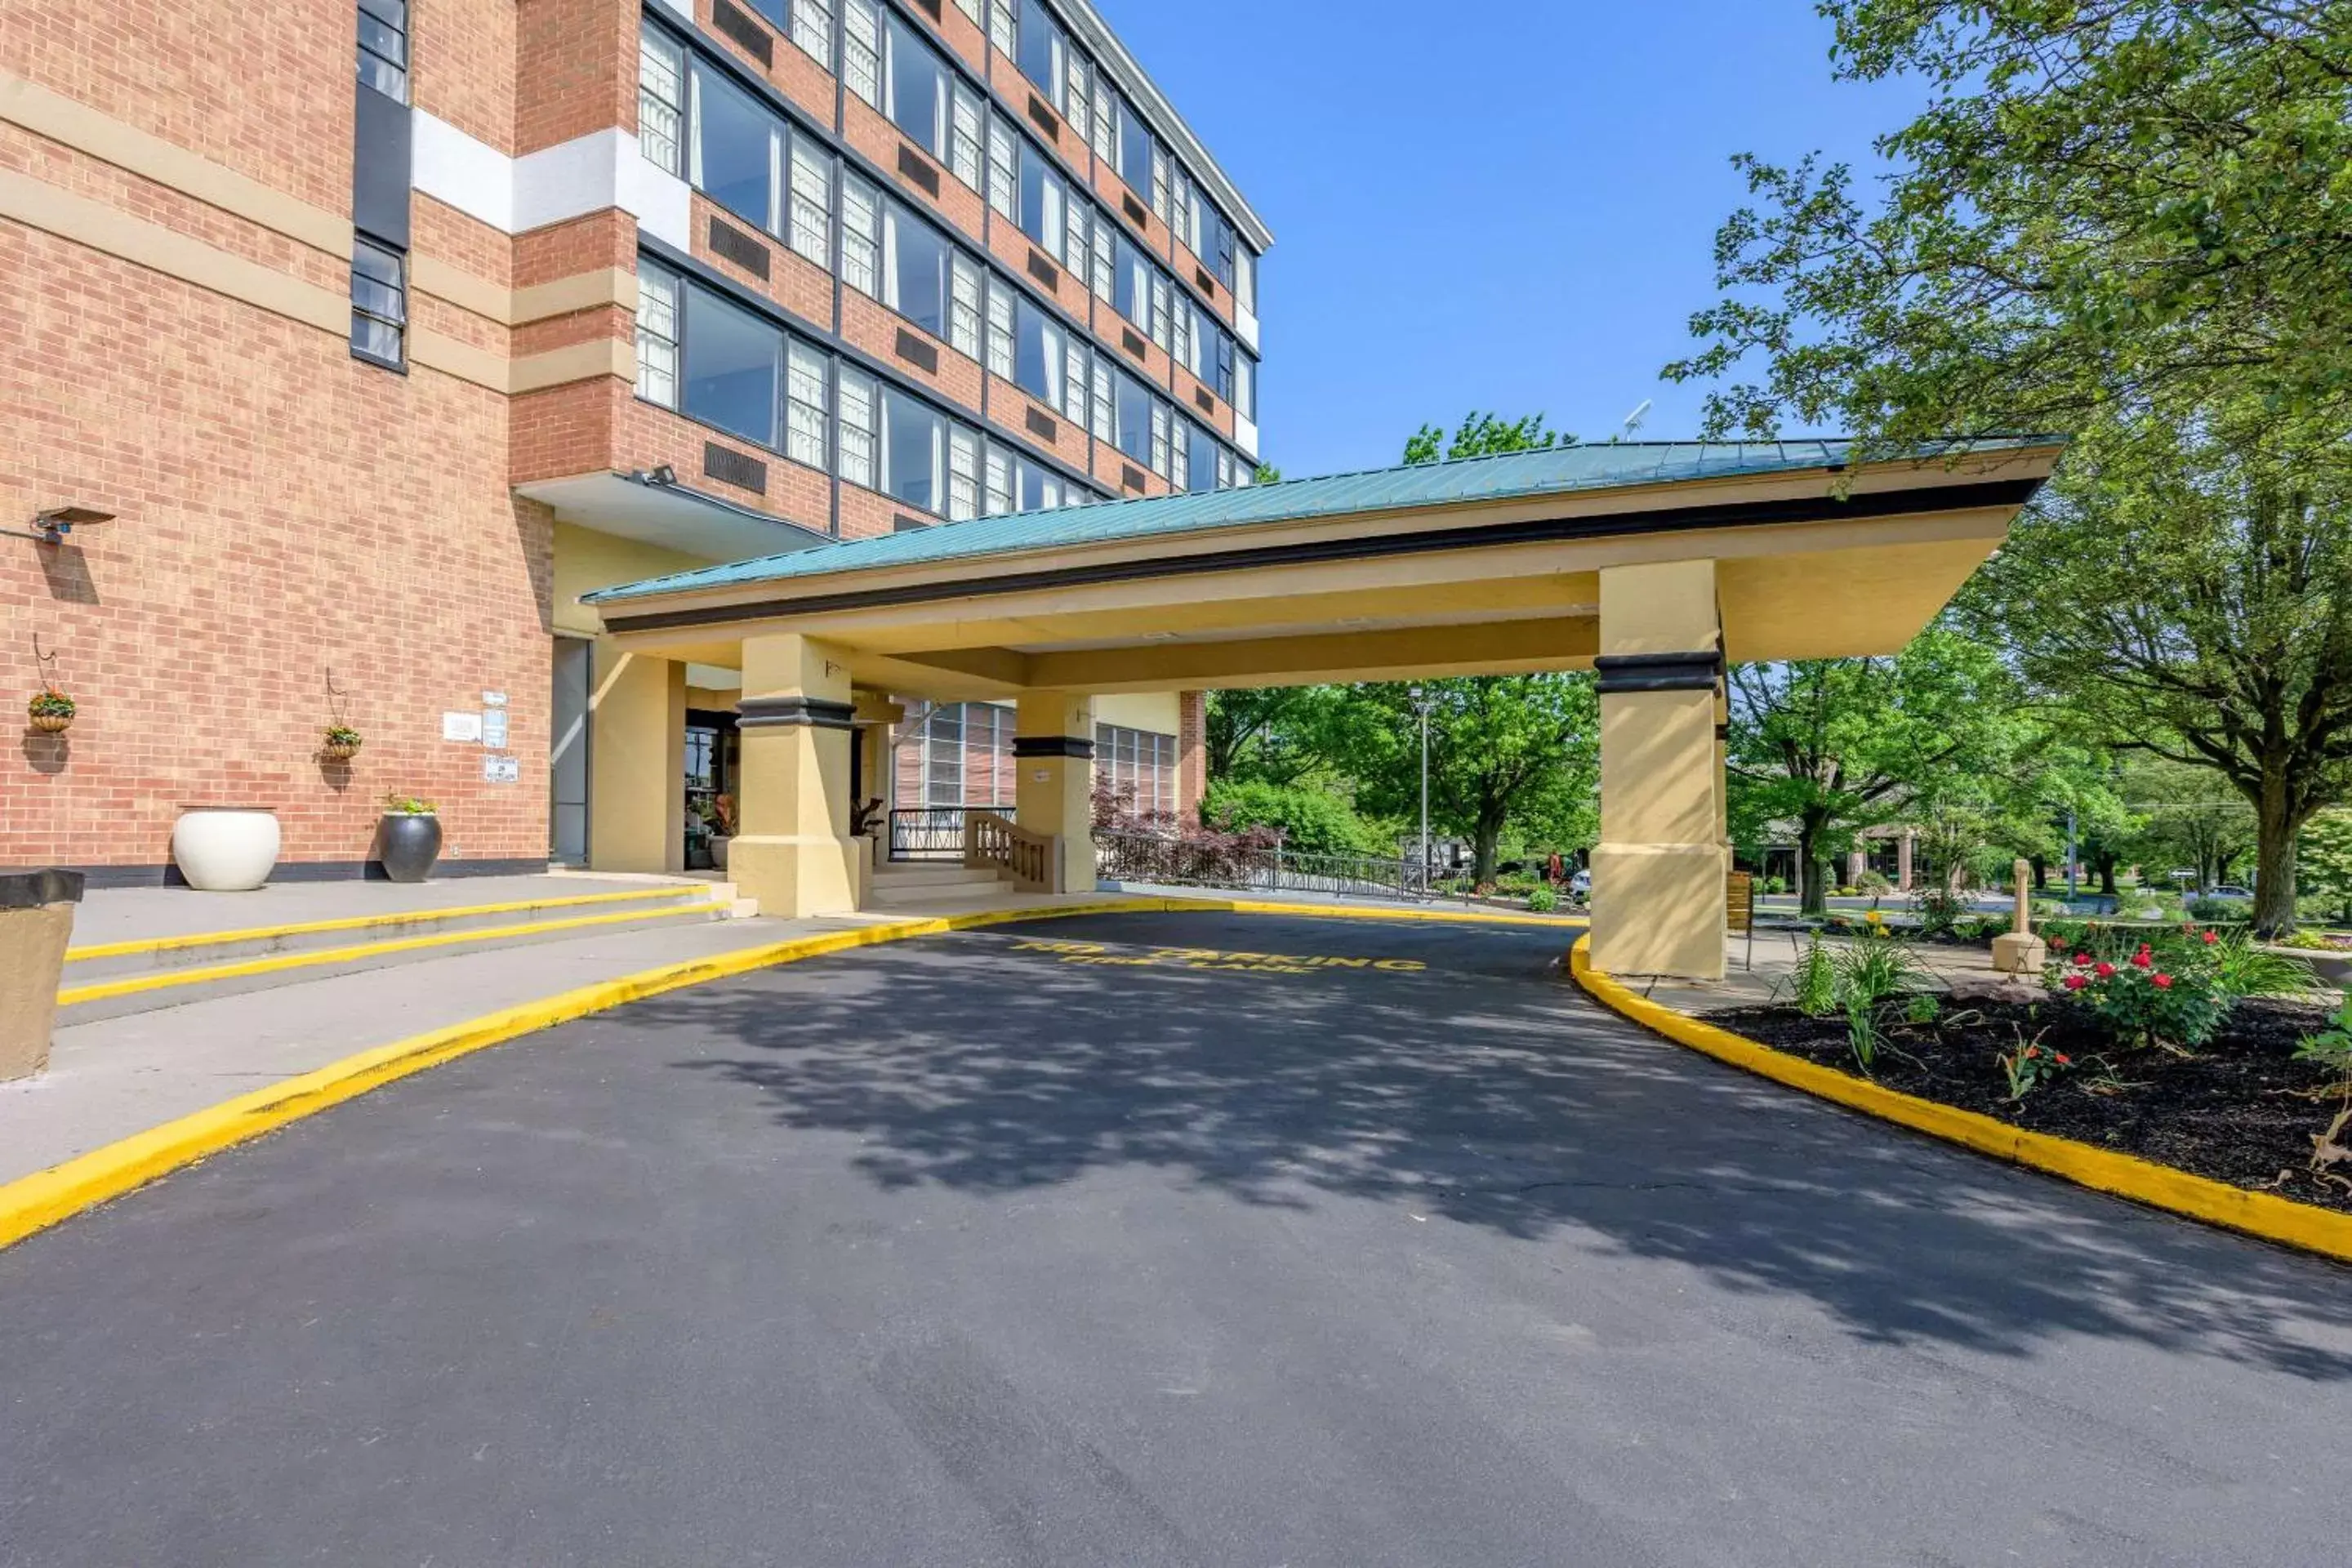 Property building in Days Inn & Suites by Wyndham Lebanon PA